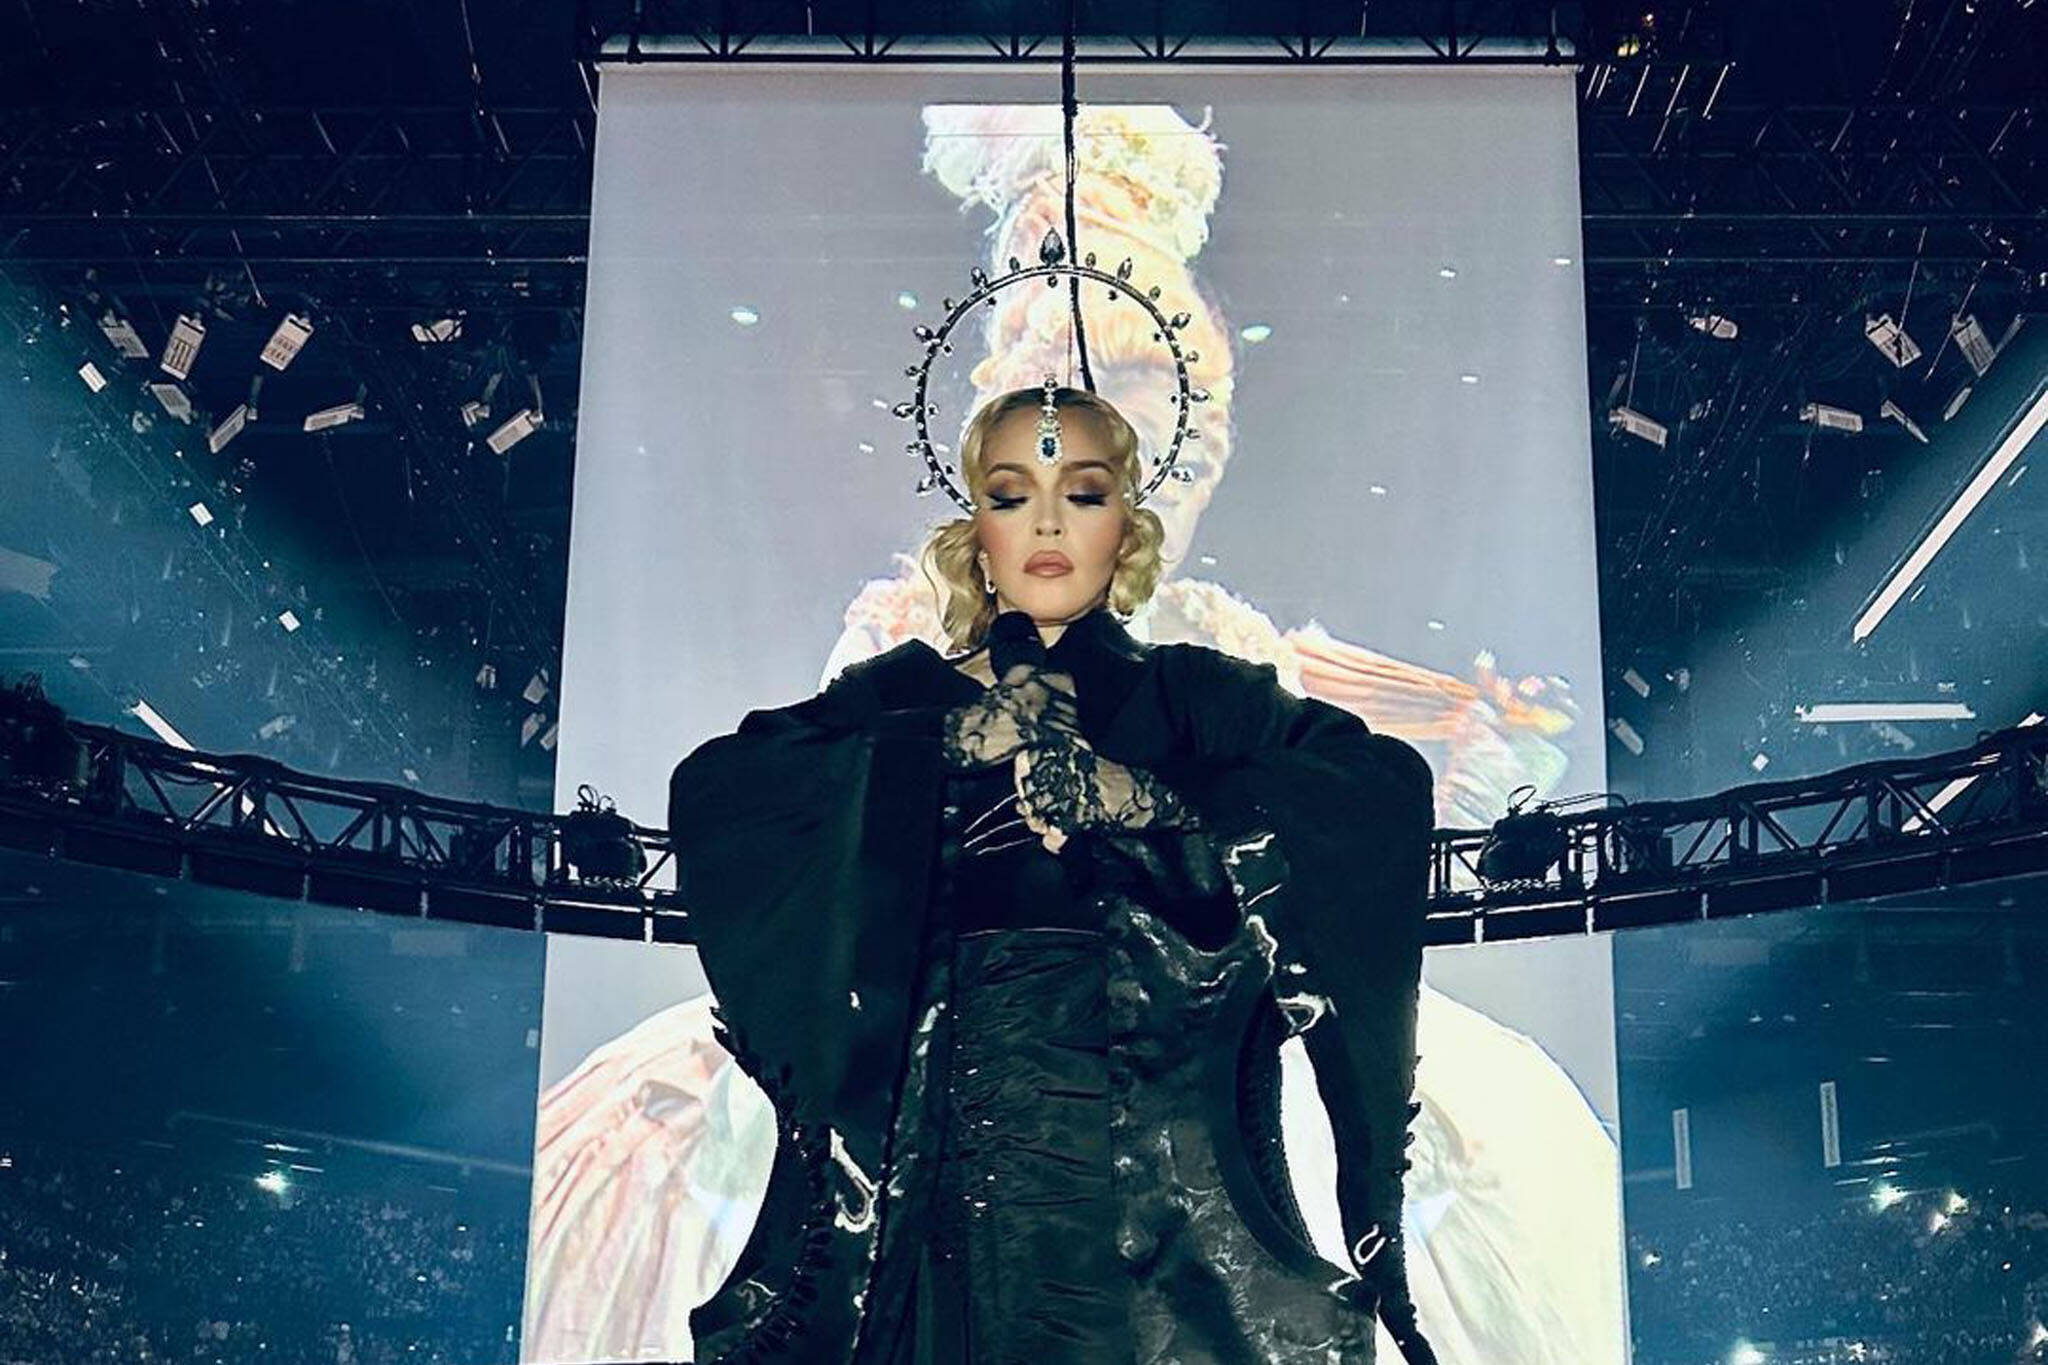 Madonna seemingly what city she was in during Toronto show